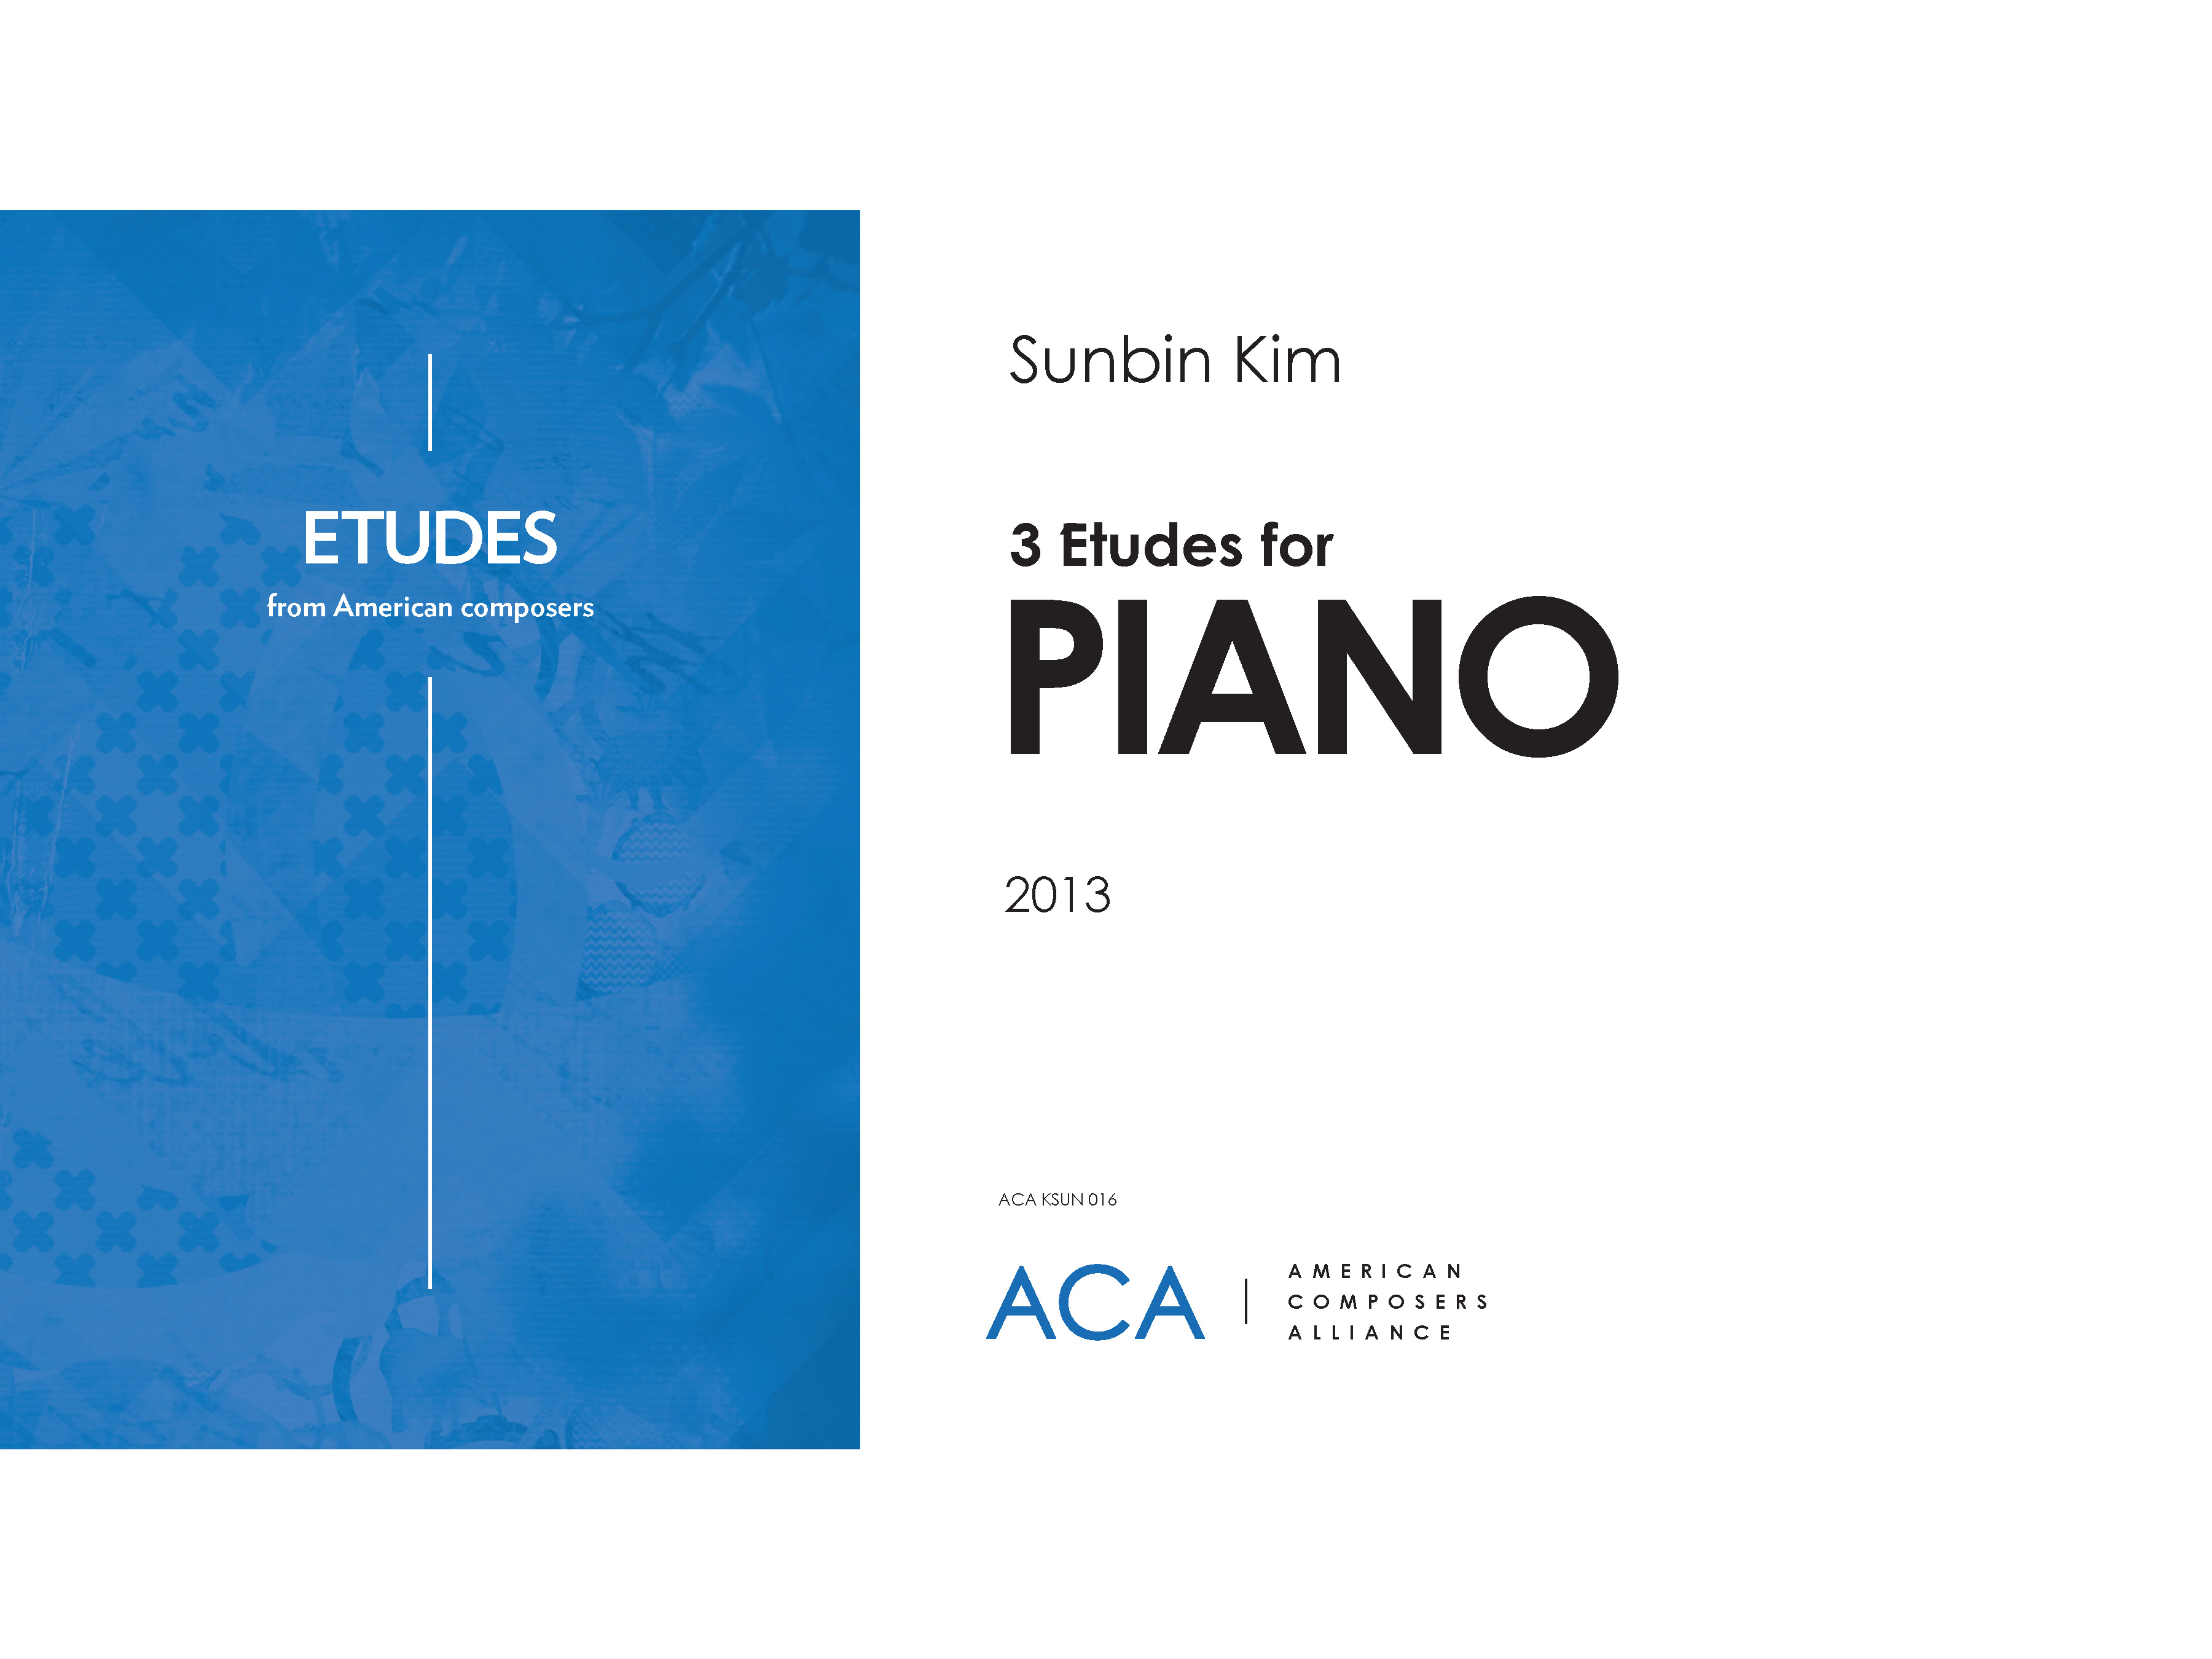 3 Etudes : For Piano (2013).